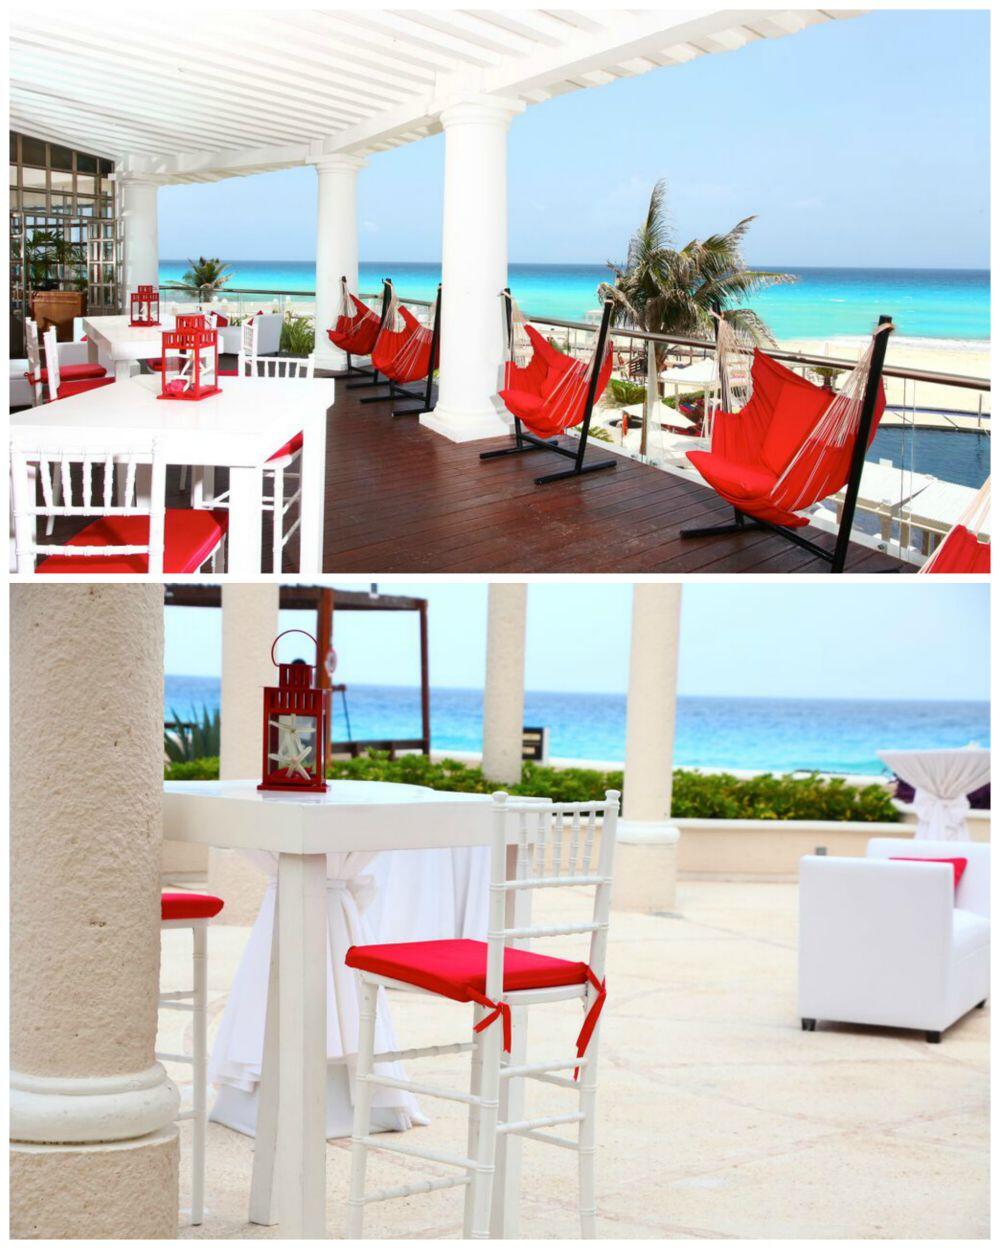 Cancun events with an ocean view